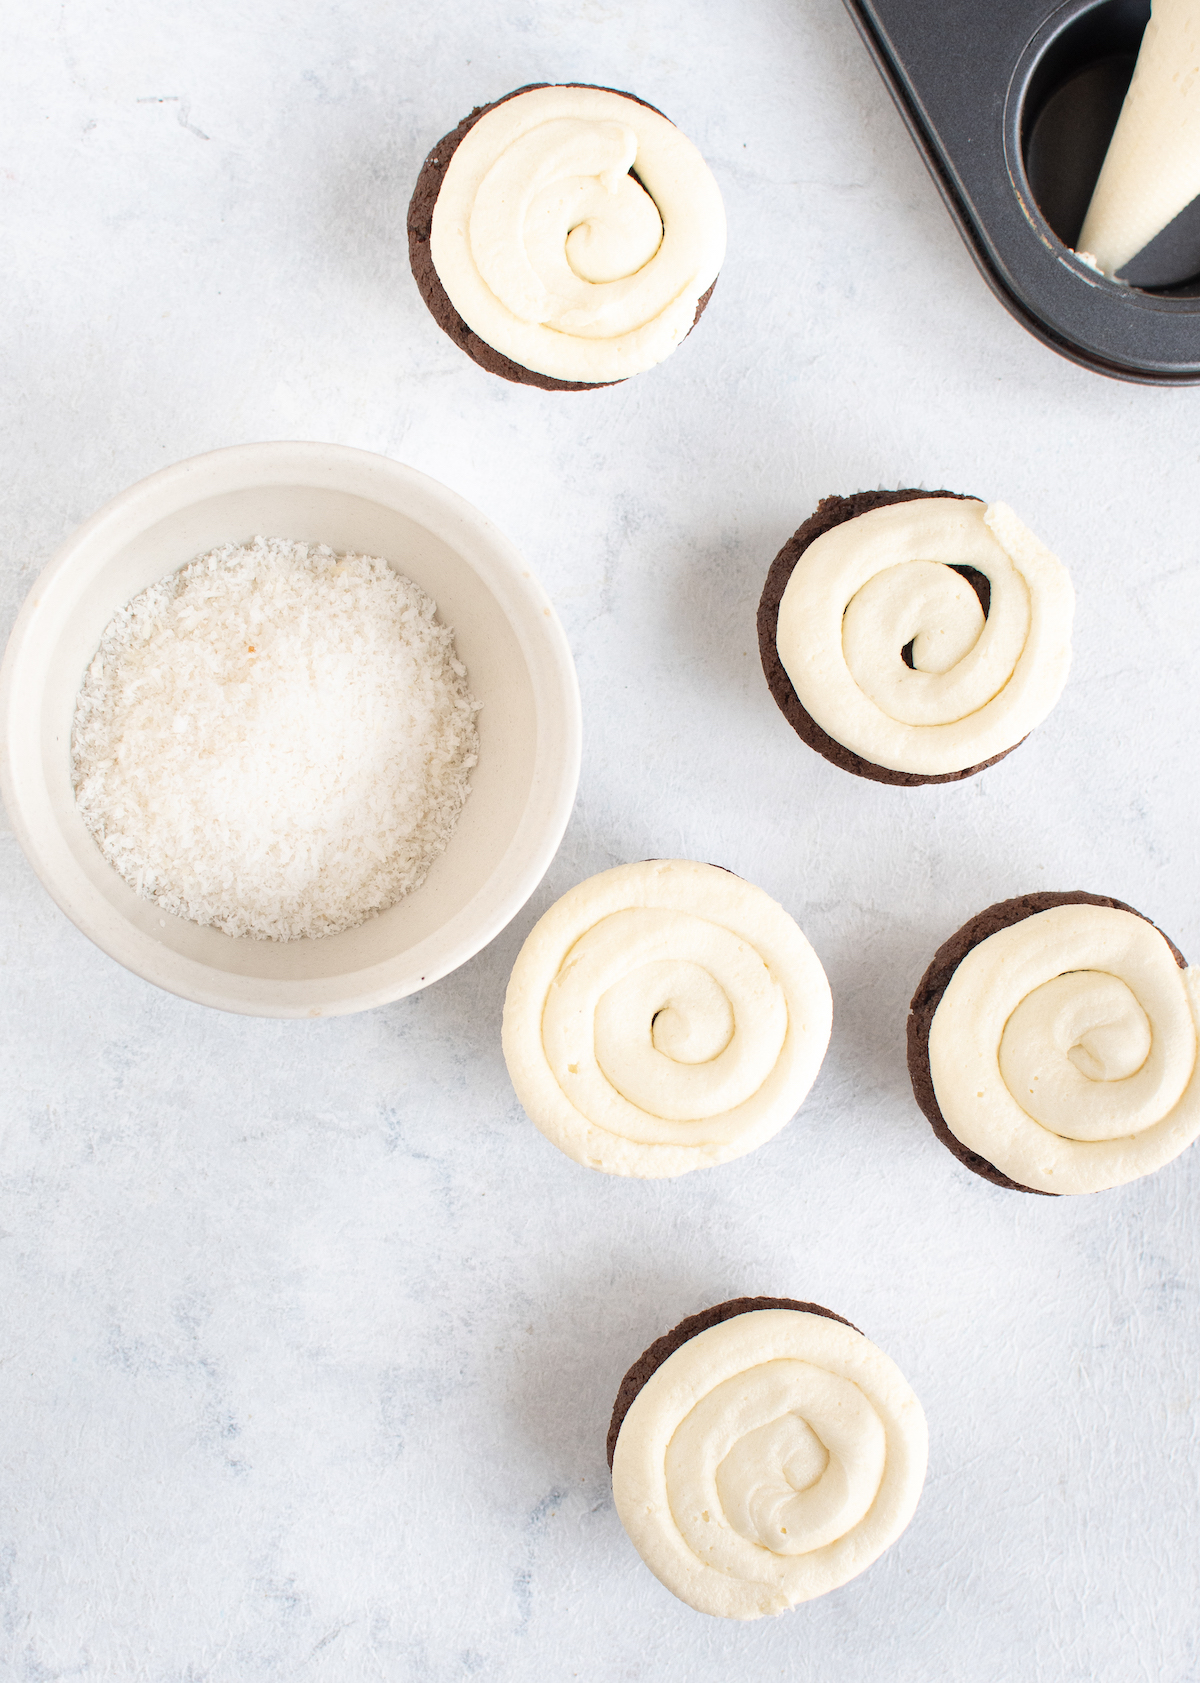 Chocolate cupcakes piped with white frosting